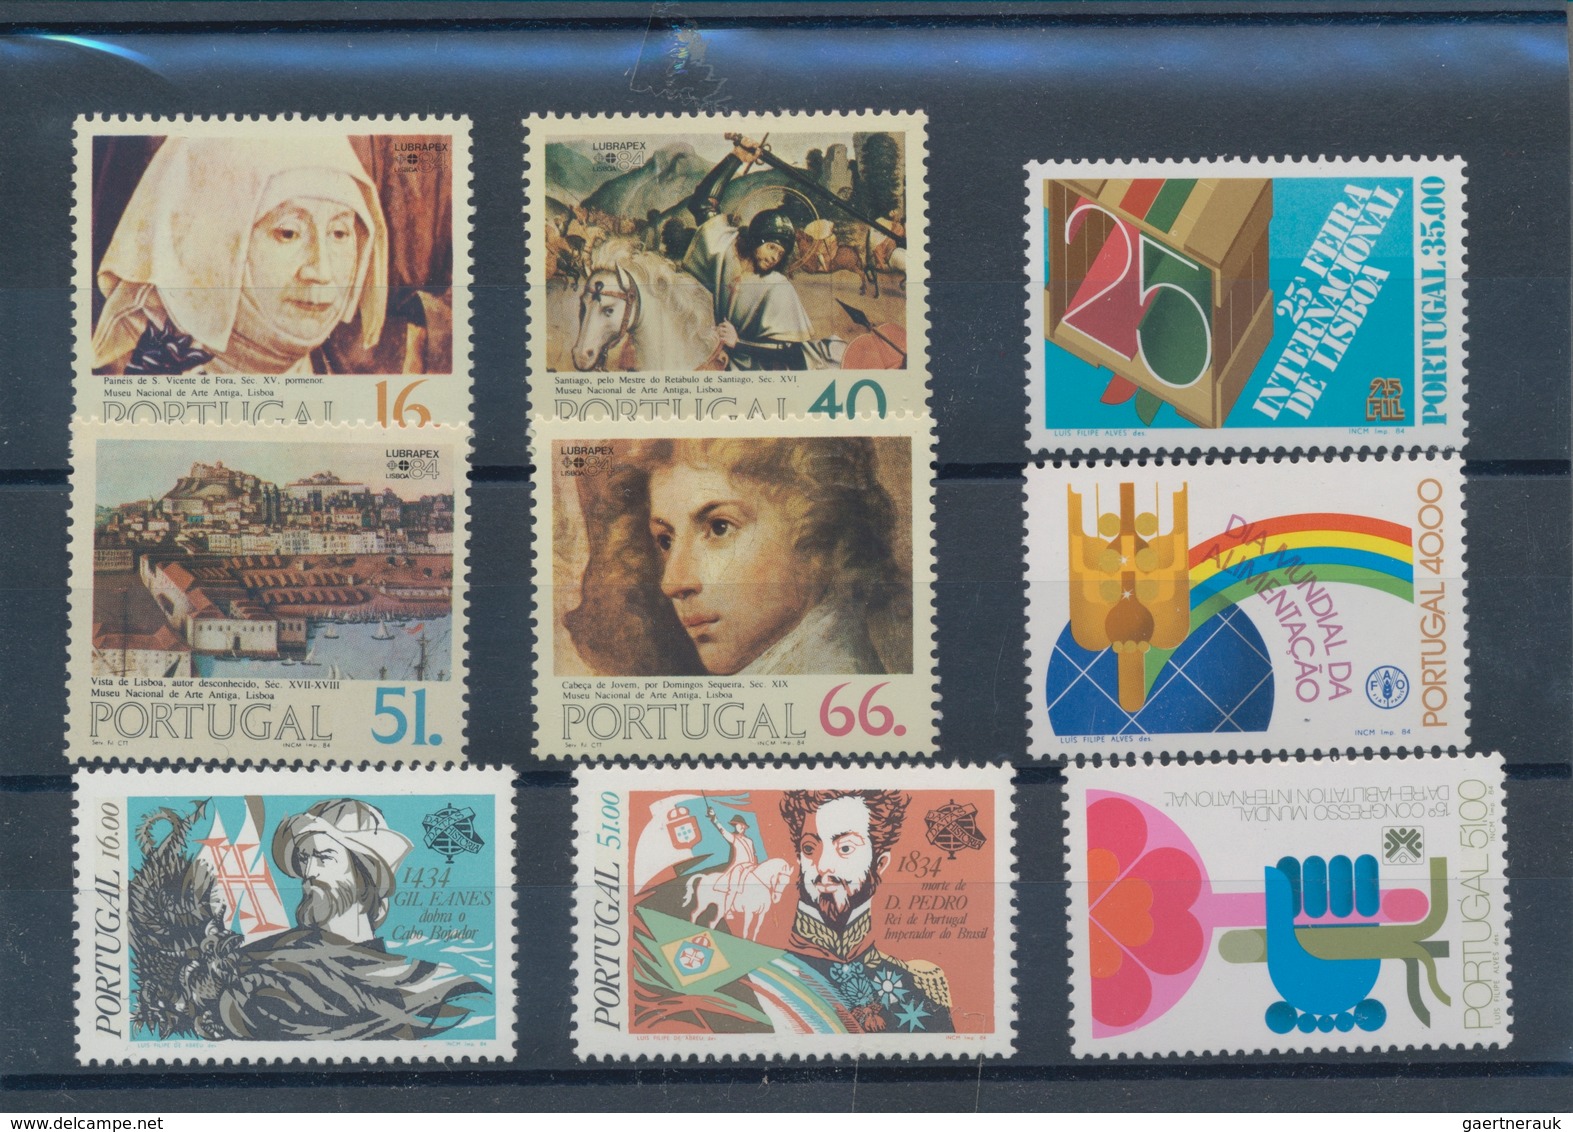 Portugal: 1982/1984, sets per 175 MNH without the definitives and souvenir sheets. Every year set is